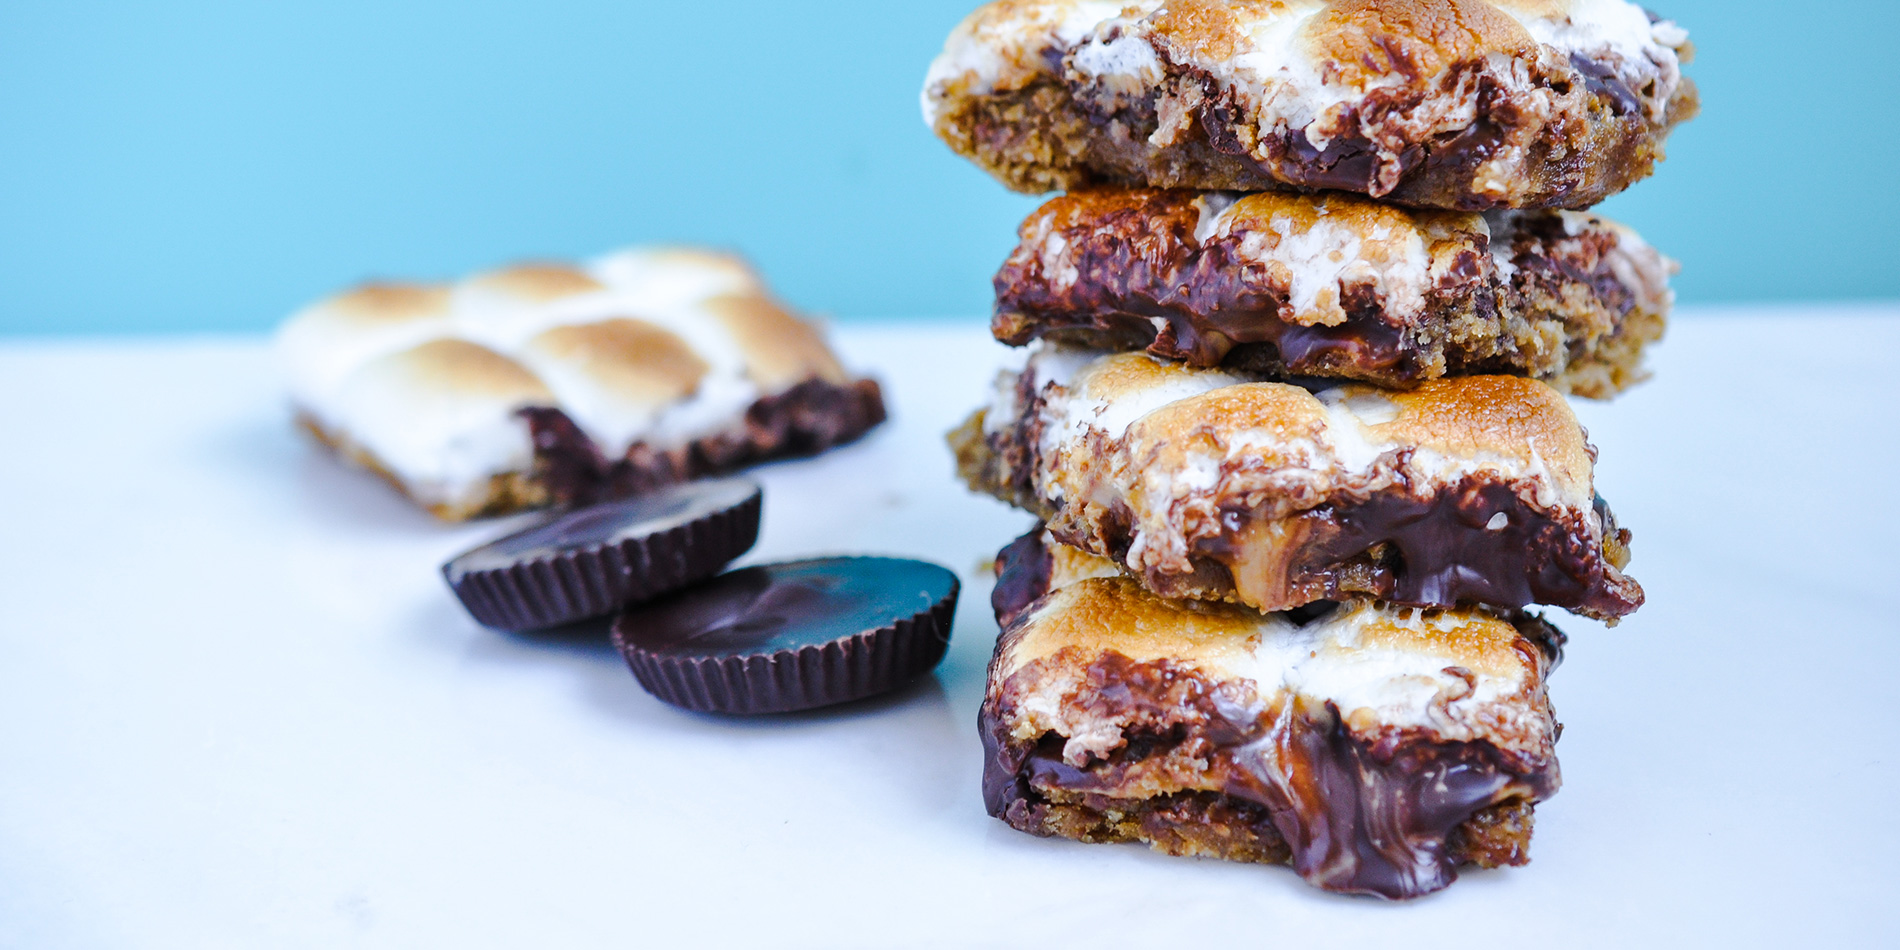 Peanut Butter Banana S'mores Bars stacked on top of each other with chocolate chips on a white top with a blue background